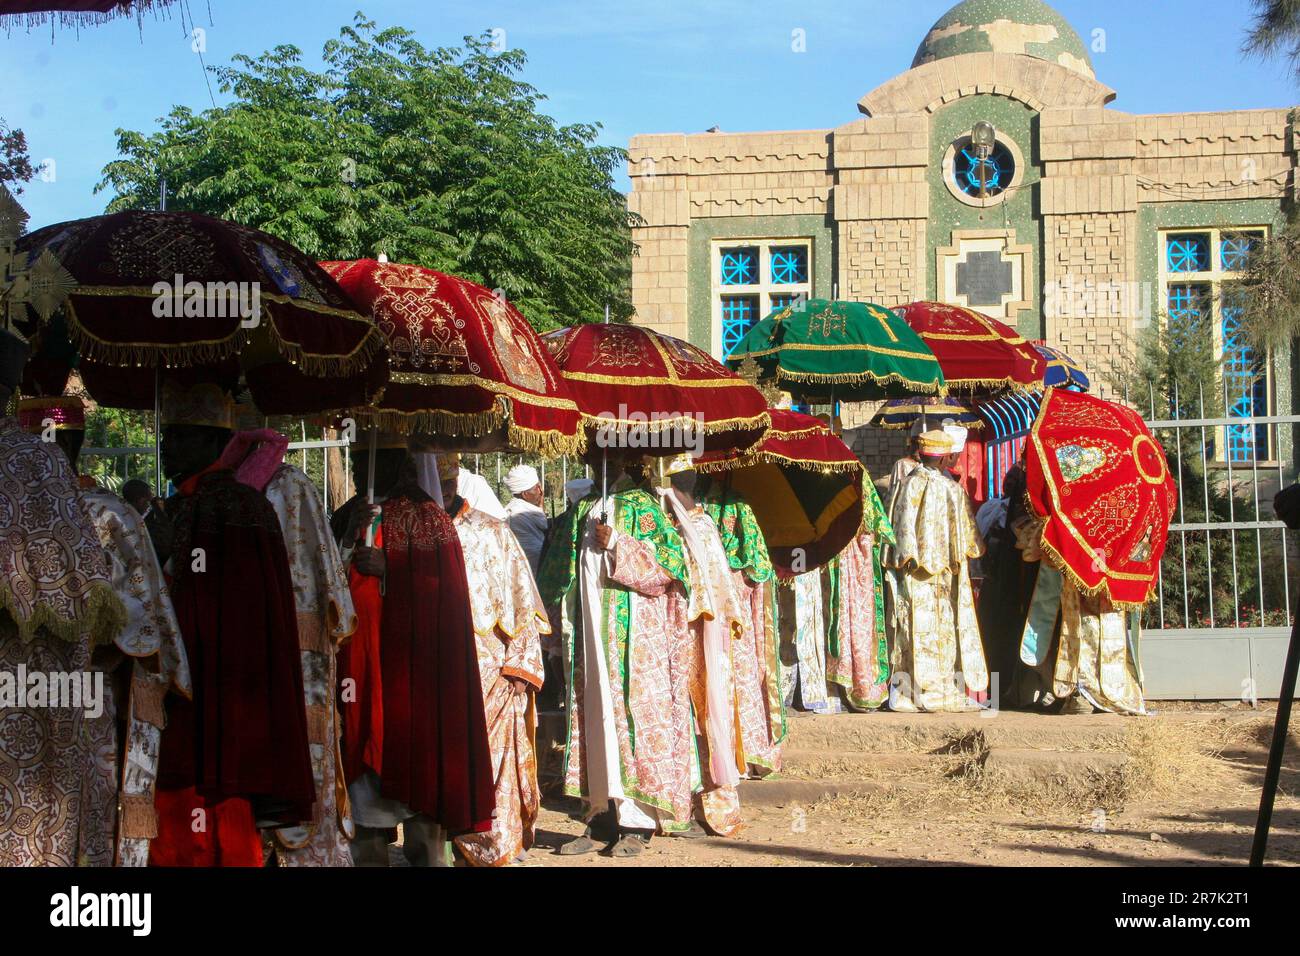 Ethiopia, Axum, The Church of Our Lady Mary of Zion said to houses the Biblical Ark of the Covenant The ark is brought out for the Timket ceremony (ce Stock Photo